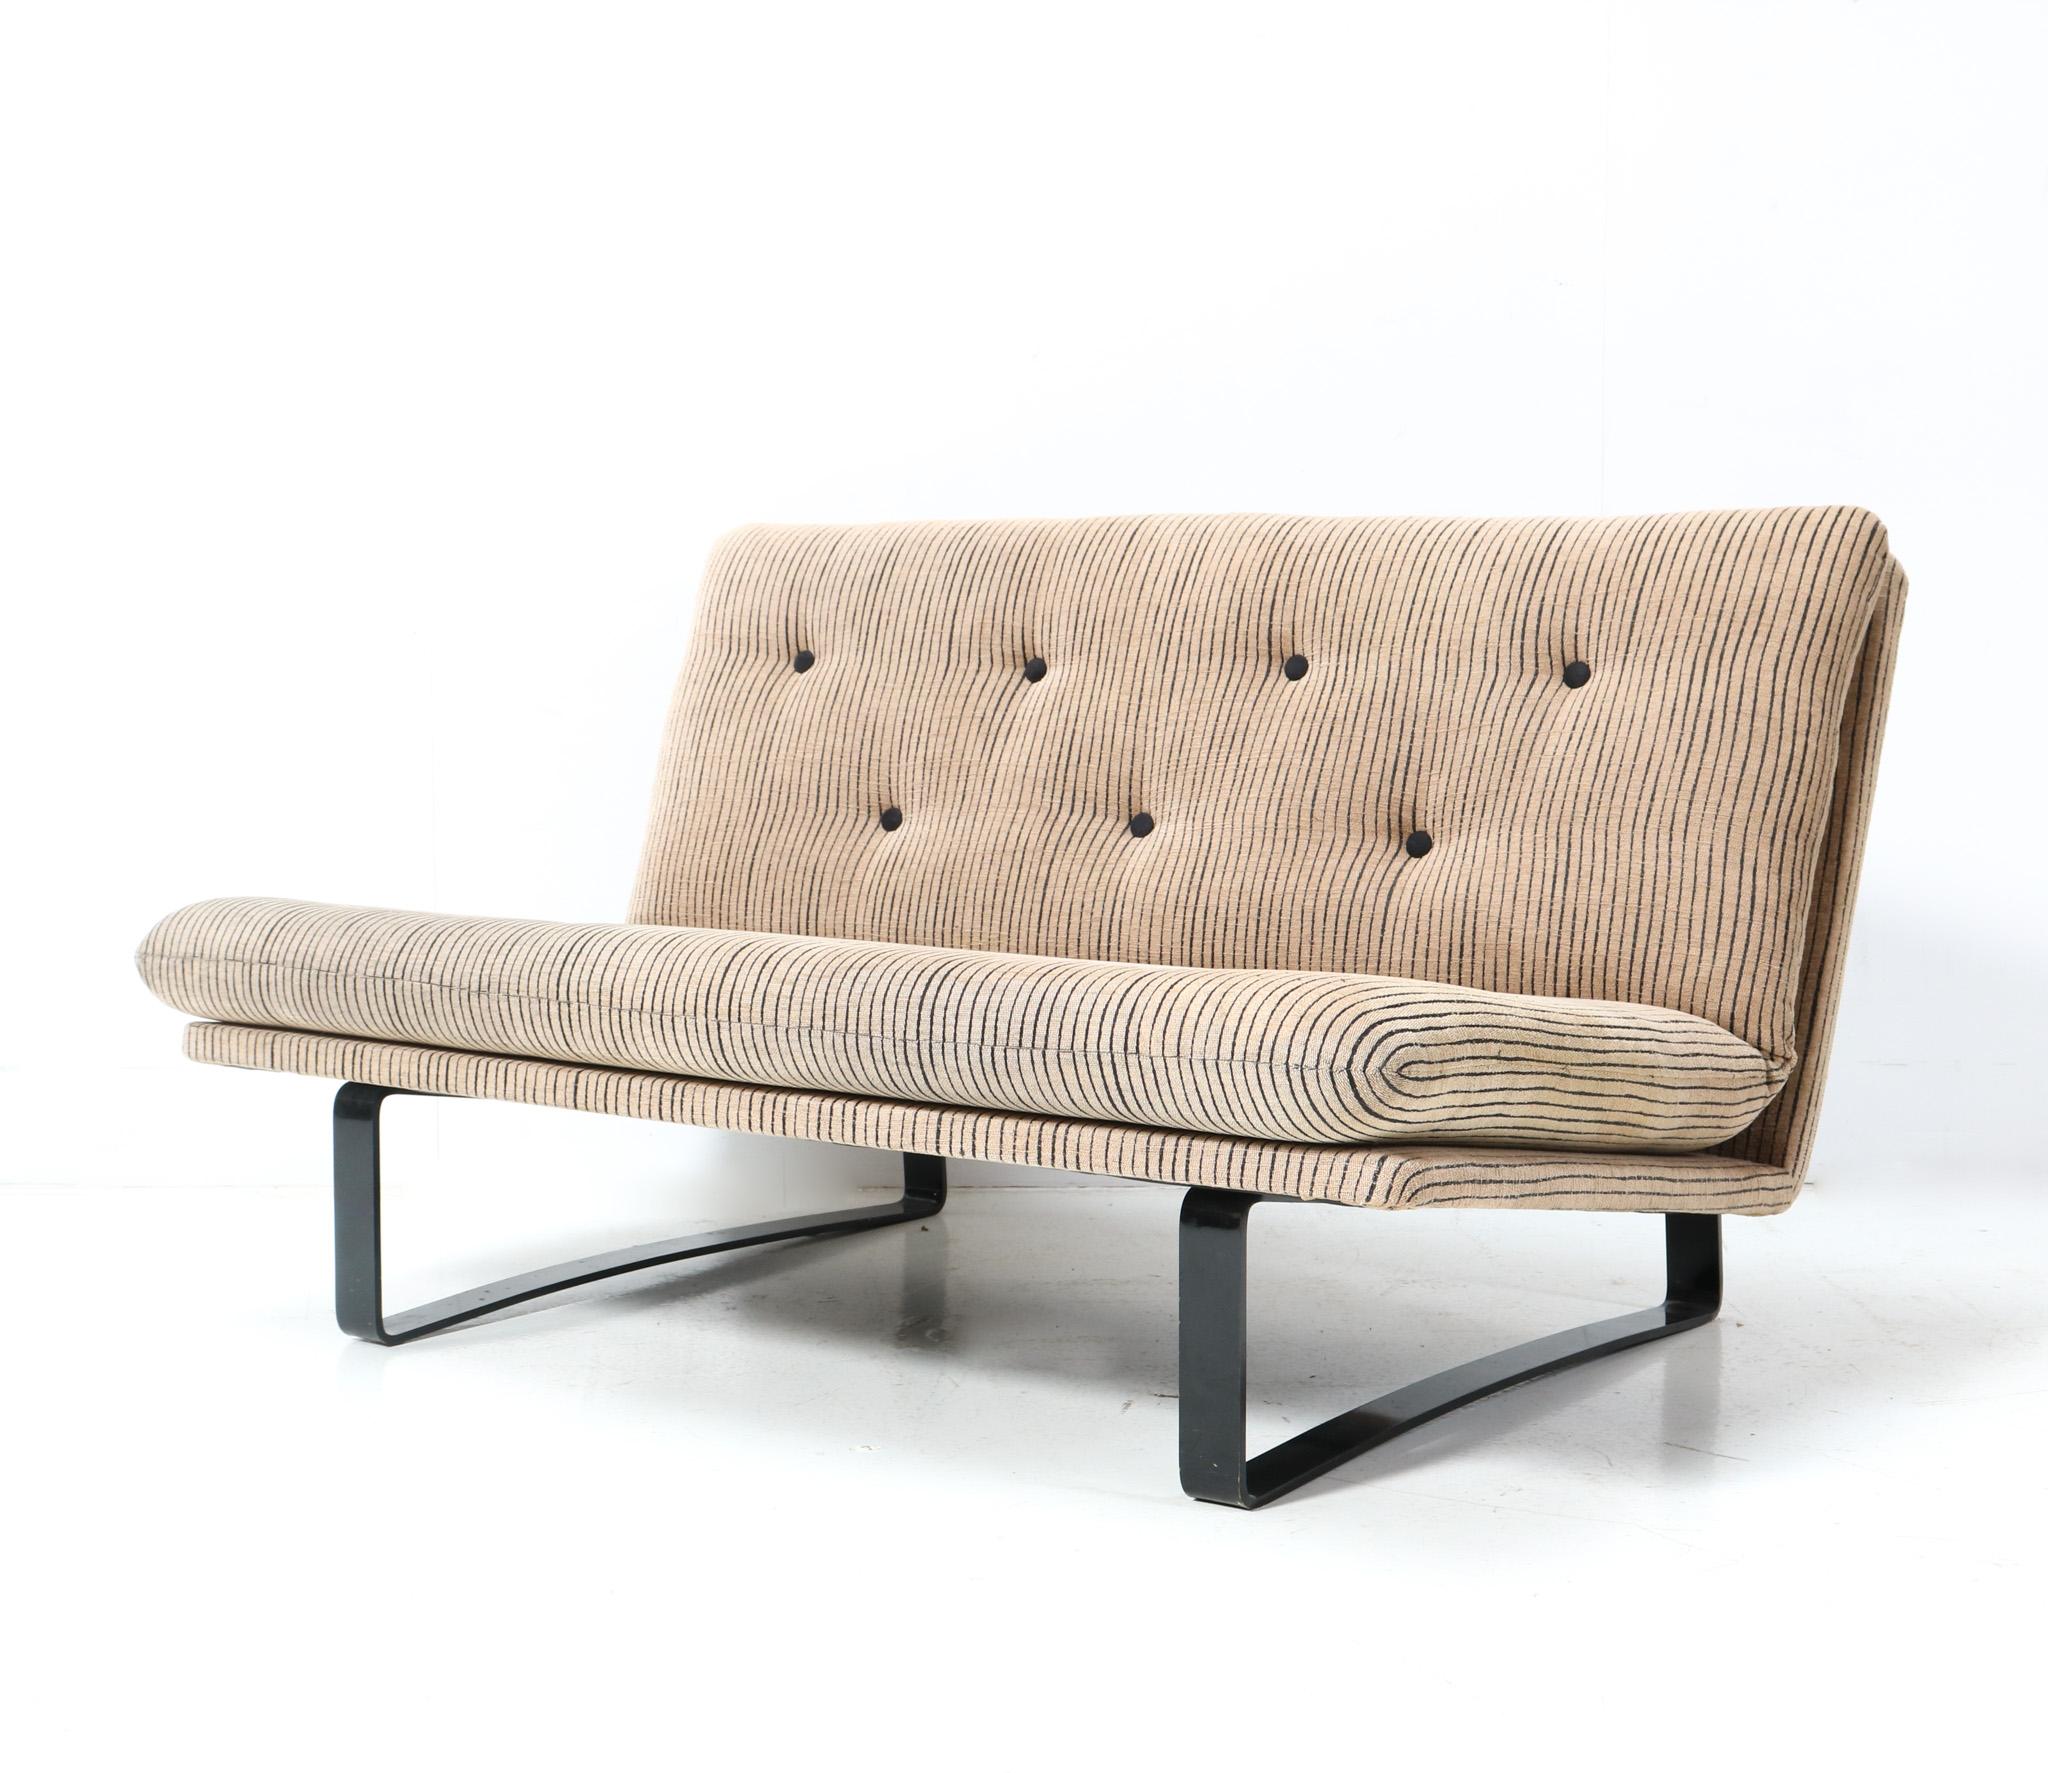  Kho Liang Le for Artifort Mid-Century Modern C683 Two-Seater Sofa, 1968 In Good Condition For Sale In Amsterdam, NL